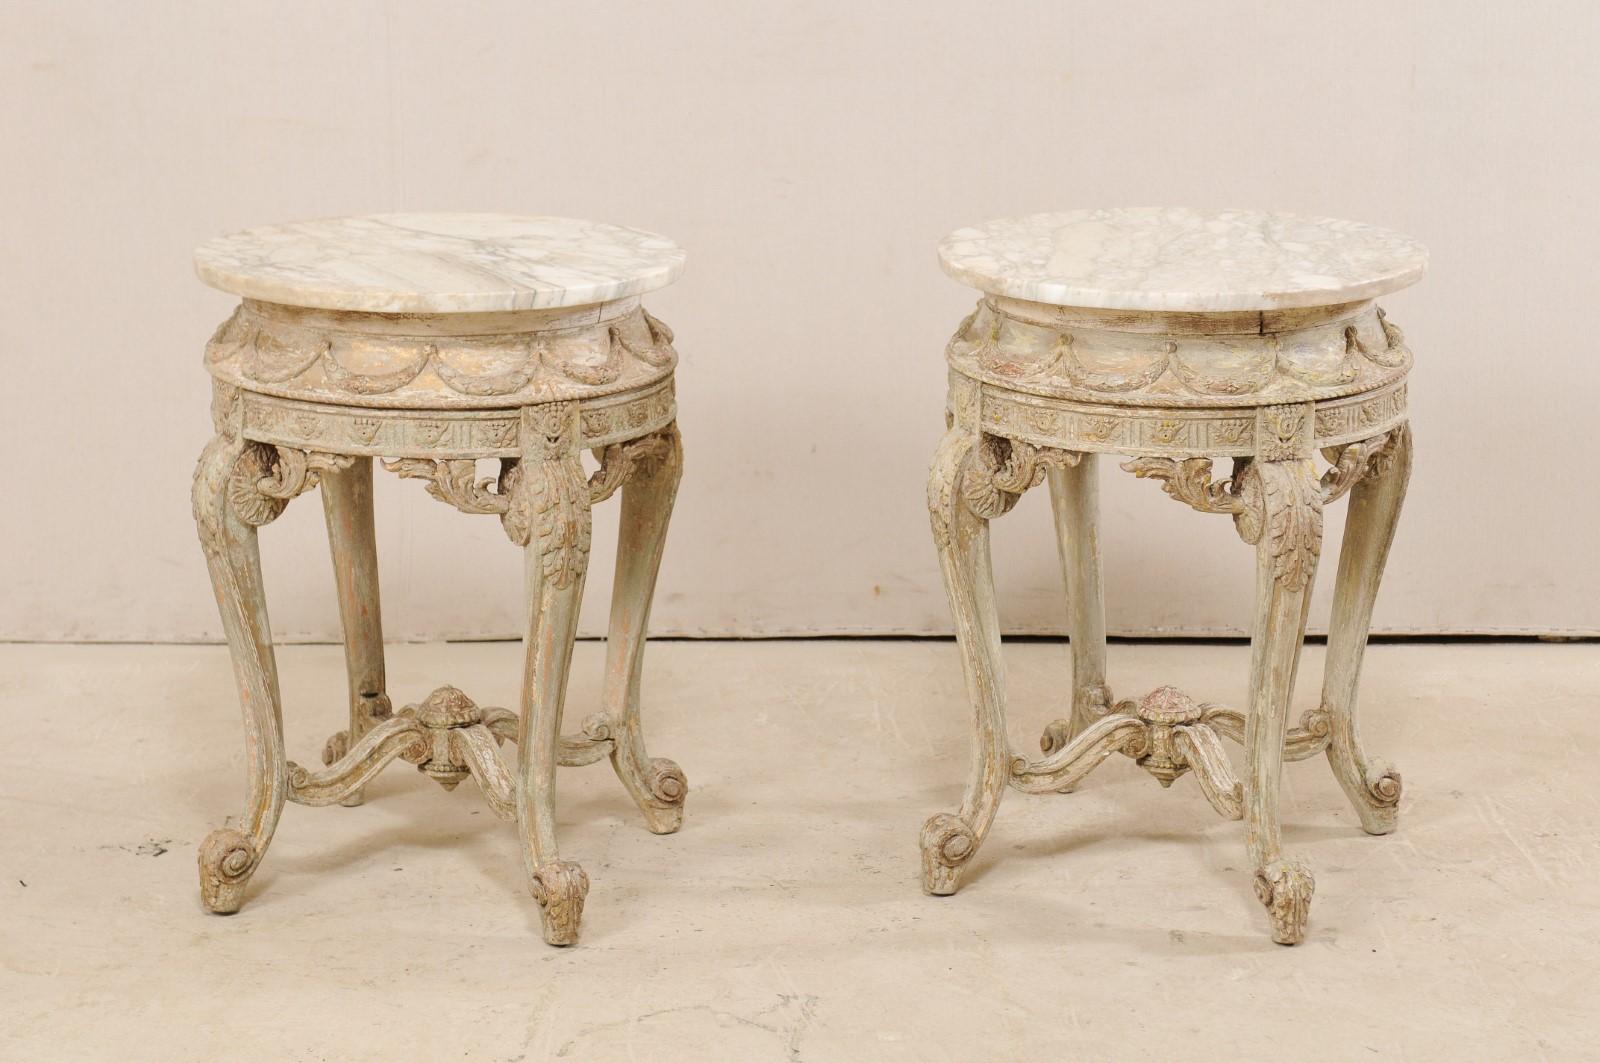 A pair of generously carved, Rococo inspired accent tables with marble tops from the mid-20th century. This vintage pair of American tables, created in Italian design, feature round marble tops which overhand their heavily carved, rounded bodies